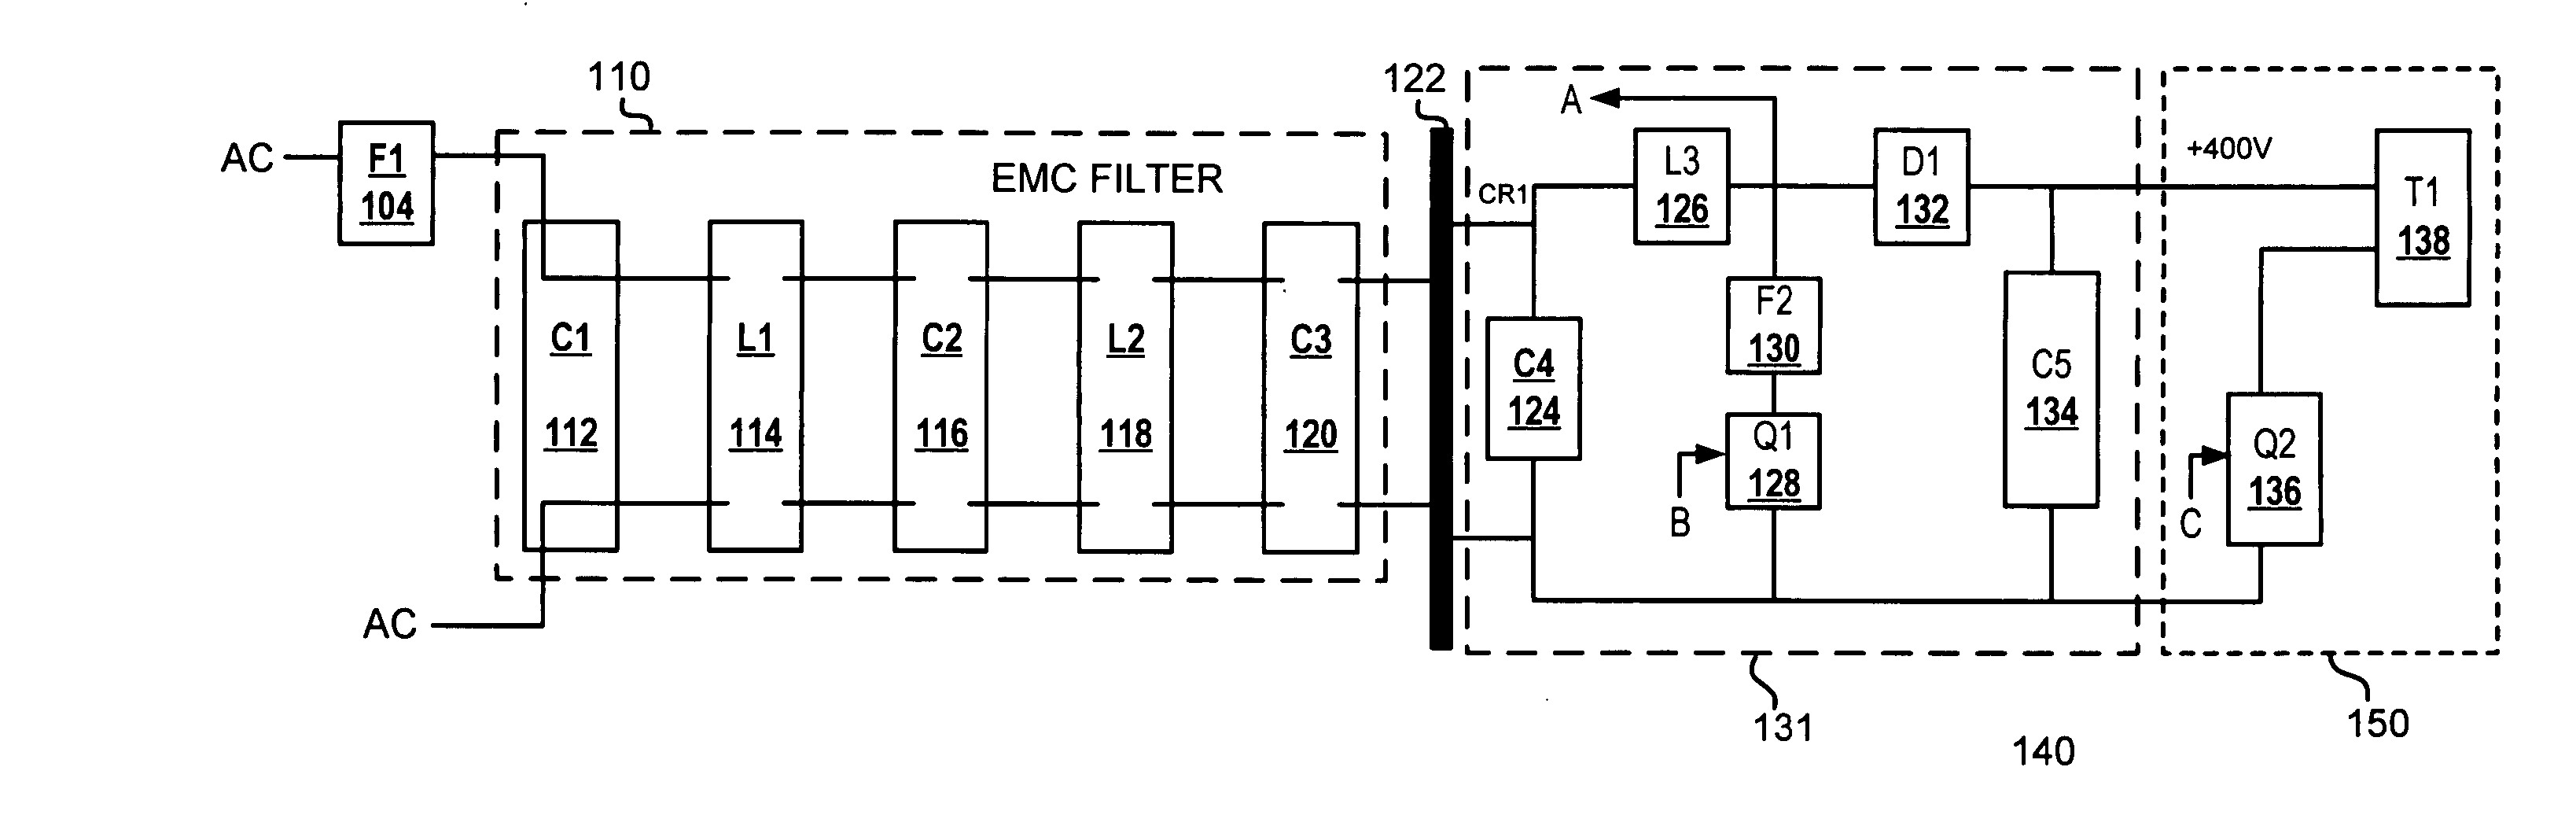 Protection of EMC filter components due to failure of boost stage/circuit to prevent smoke, sound or fire in a boost stage under fault condition